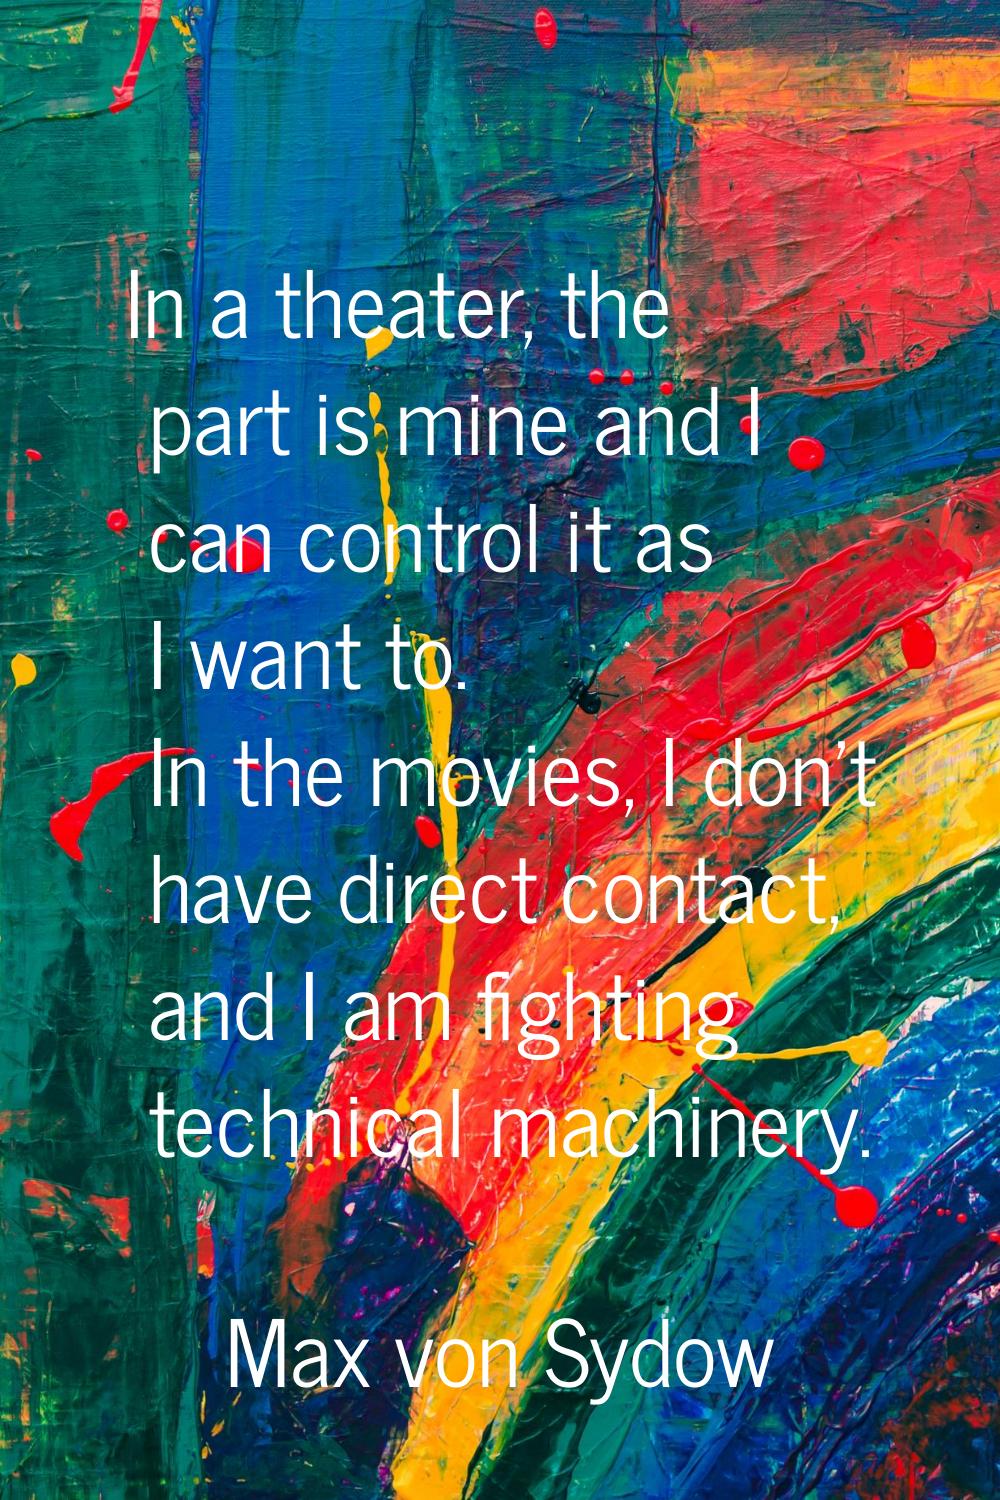 In a theater, the part is mine and I can control it as I want to. In the movies, I don't have direc